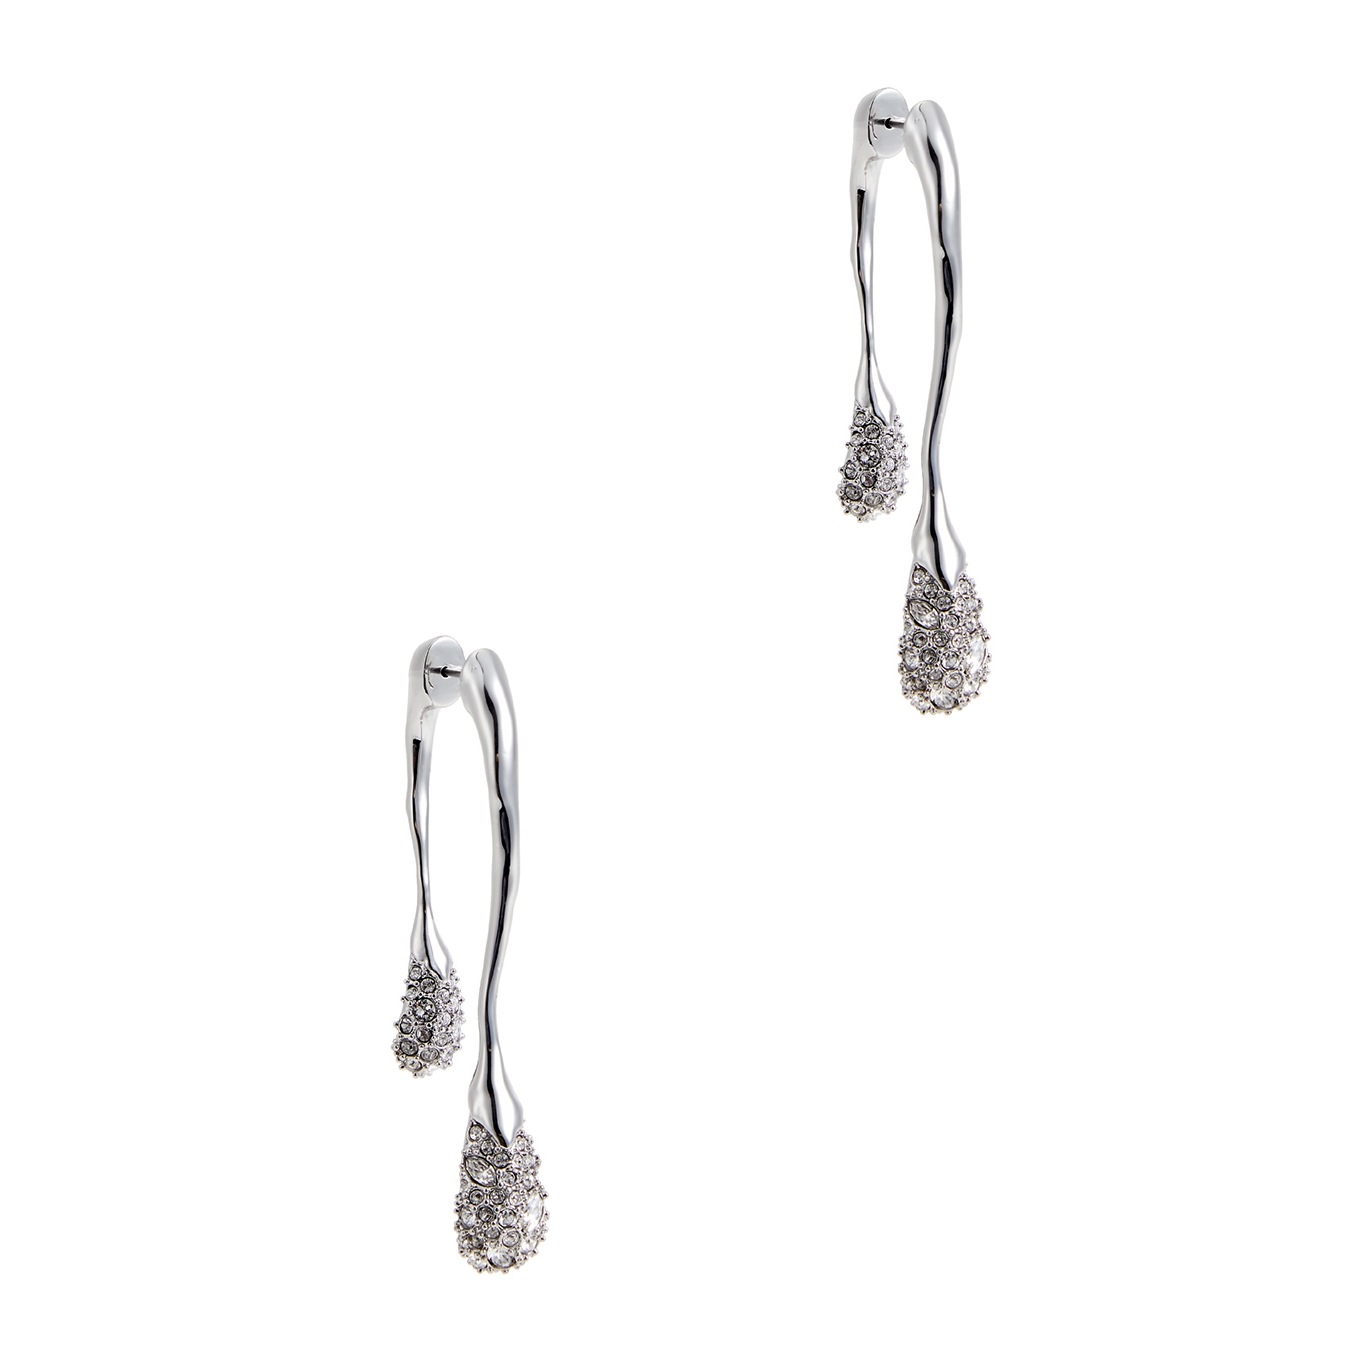 Alexis Bittar Solanales Embellished Double Drop Earrings